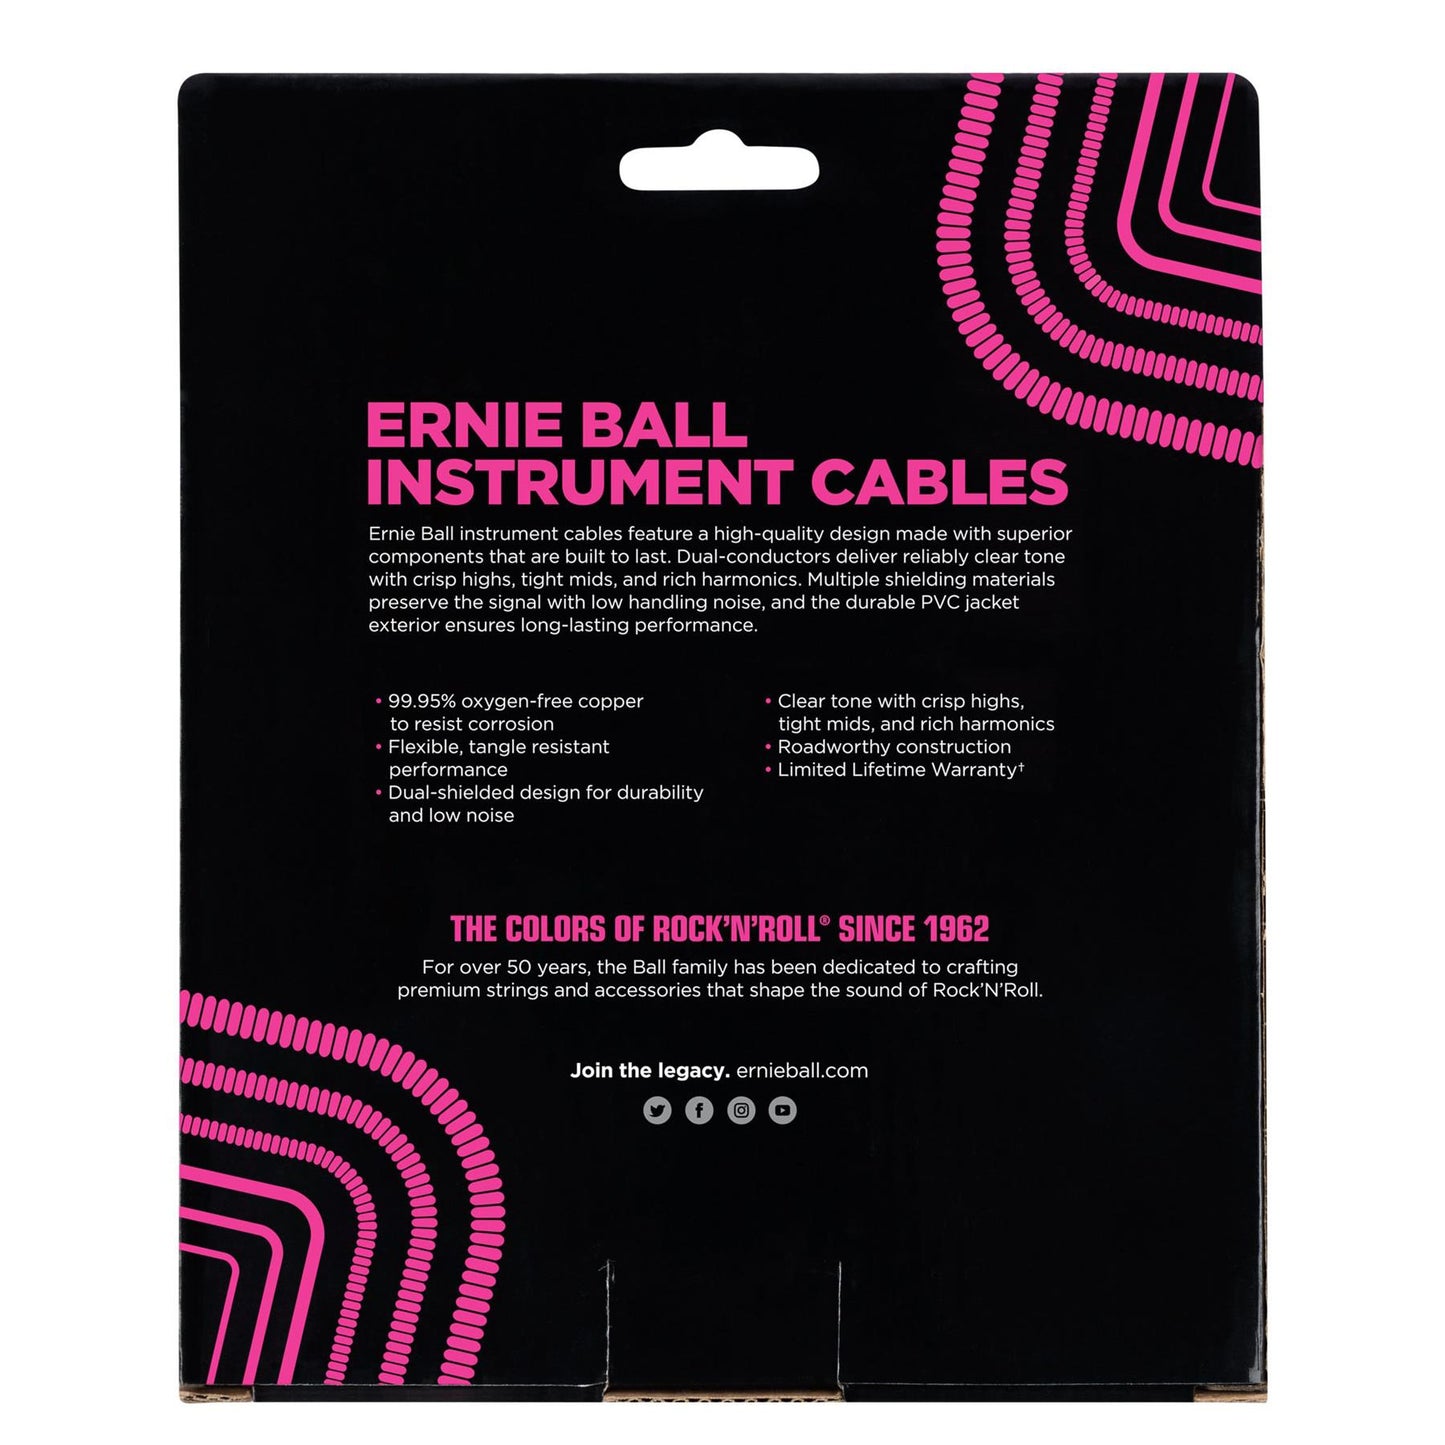 Ernie Ball Coiled Guitar Cable Straight/Angle White - 30ft (9.14m)iled Instrument Cable Straight/Angled Jacks White